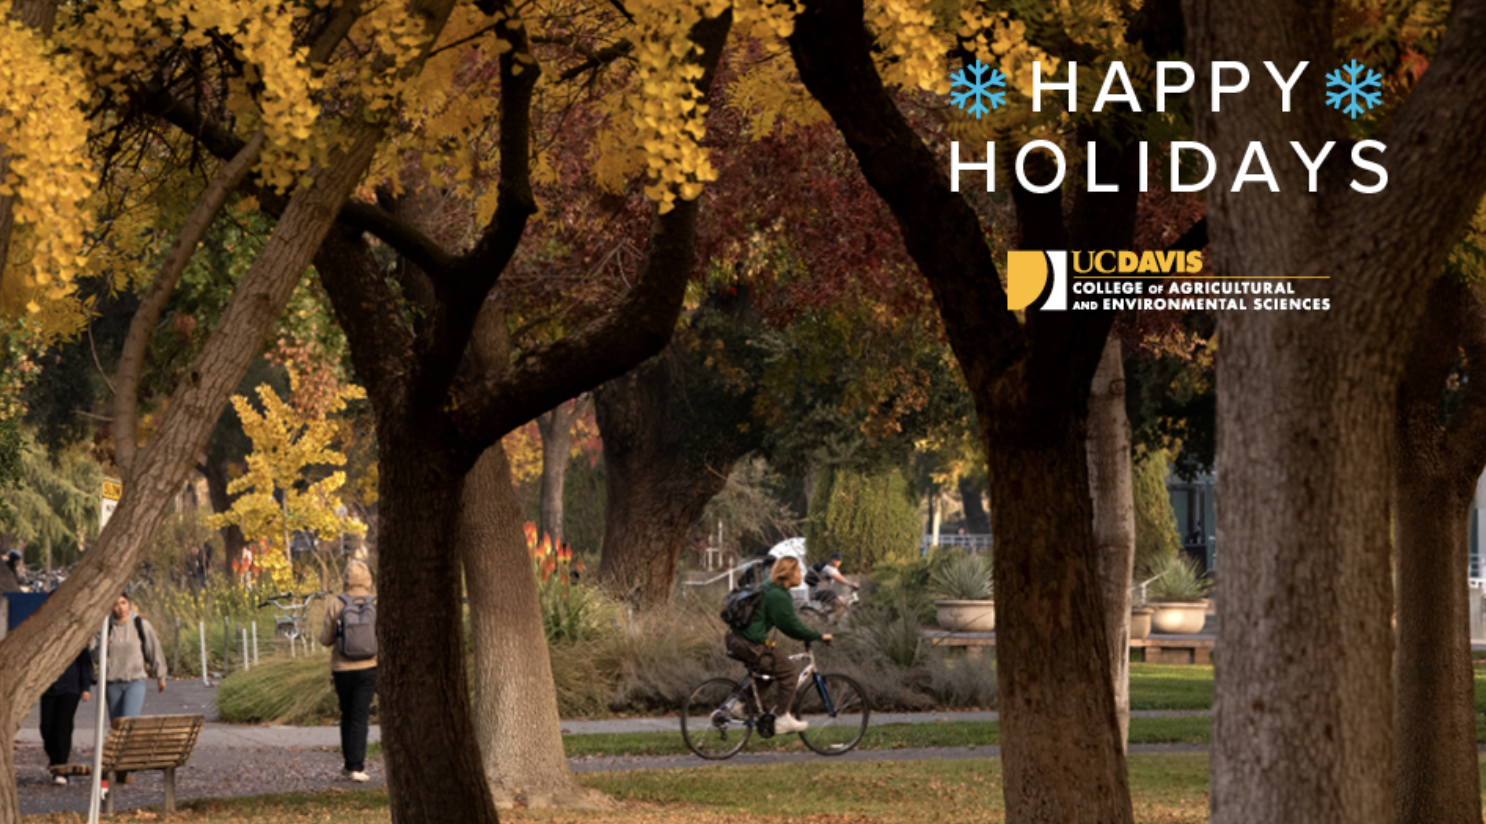 A fall foliage picture with "Happy Holidays" in the upper right corner with CA&ES logo.